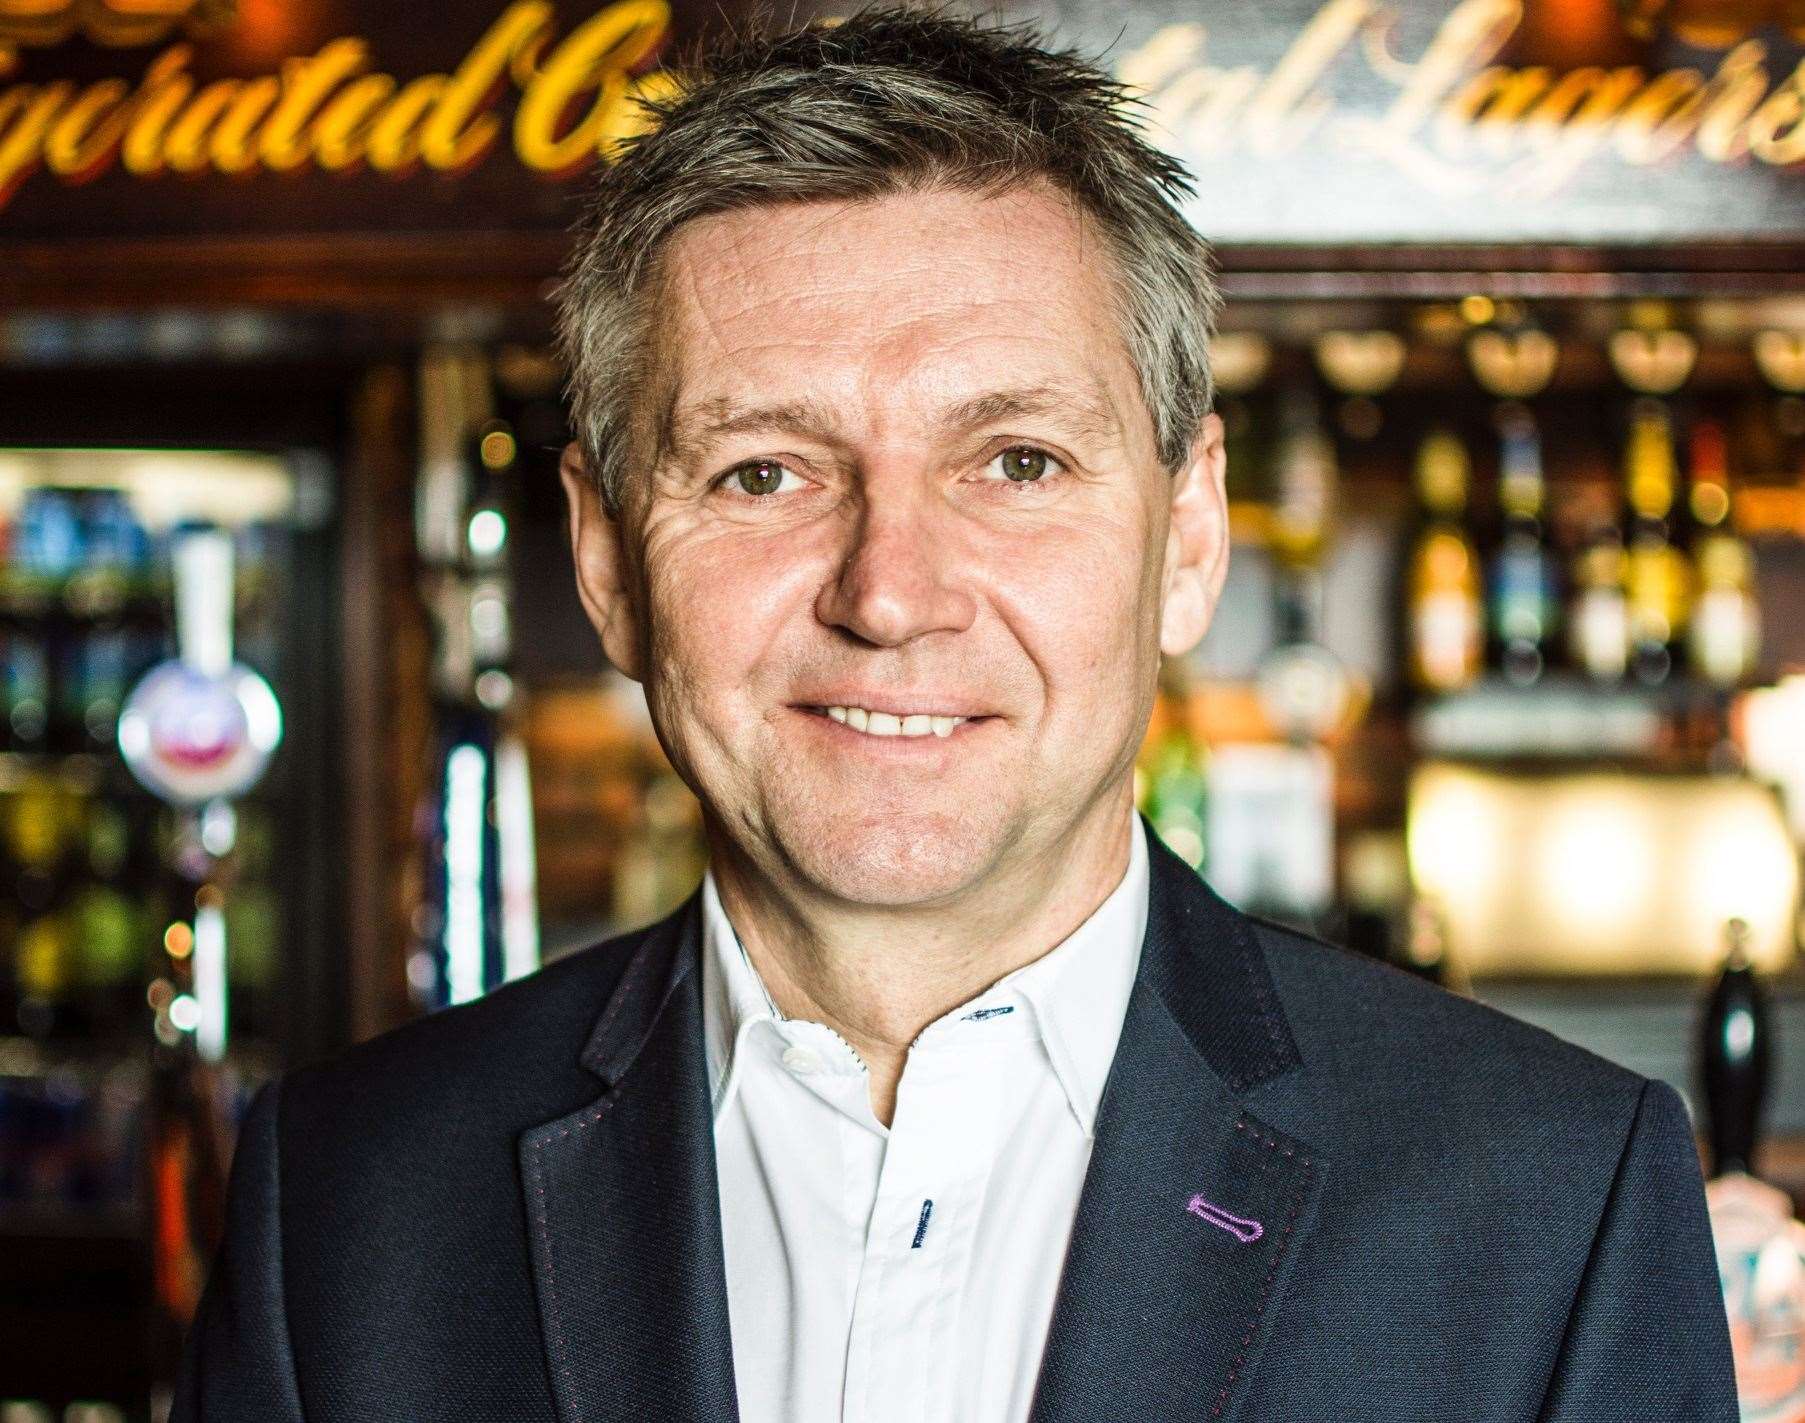 Philip Thorley, the director of Thorley Taverns, says the pub site has been sold to developers